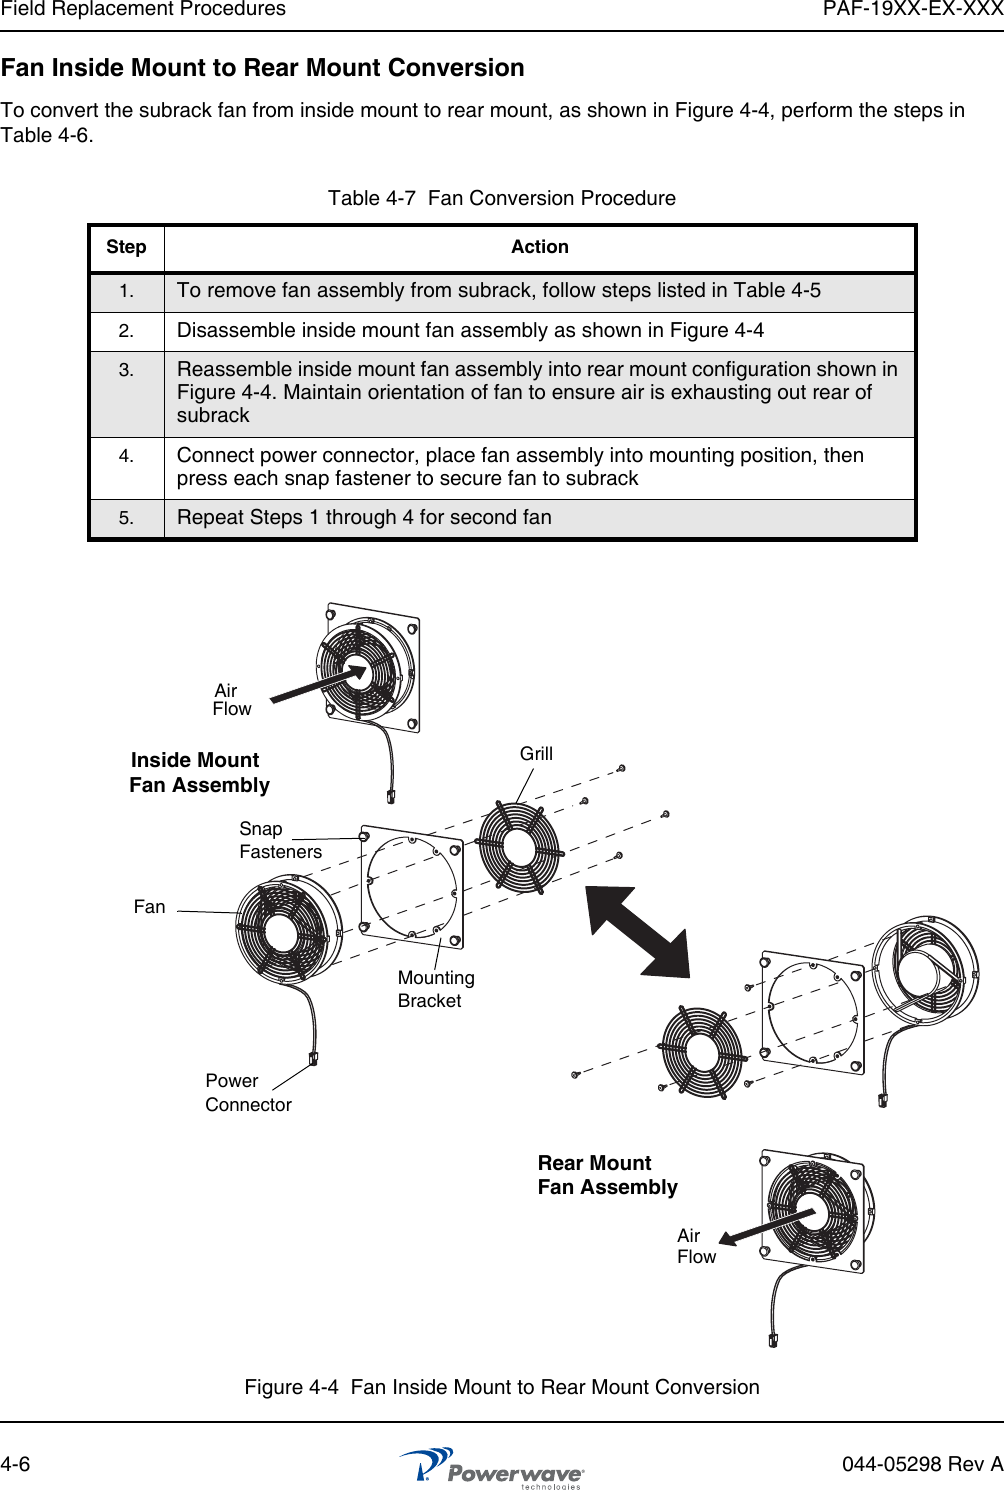 Field Replacement Procedures PAF-19XX-EX-XXX4-6 044-05298 Rev AFan Inside Mount to Rear Mount ConversionTo convert the subrack fan from inside mount to rear mount, as shown in Figure 4-4, perform the steps in Table 4-6.Figure 4-4  Fan Inside Mount to Rear Mount ConversionTable 4-7  Fan Conversion ProcedureStep Action1. To remove fan assembly from subrack, follow steps listed in Table 4-52. Disassemble inside mount fan assembly as shown in Figure 4-43. Reassemble inside mount fan assembly into rear mount configuration shown in Figure 4-4. Maintain orientation of fan to ensure air is exhausting out rear of subrack4. Connect power connector, place fan assembly into mounting position, then press each snap fastener to secure fan to subrack5. Repeat Steps 1 through 4 for second fanMountingBracketSnapFastenersFanGrillInside MountRear MountFan AssemblyFan AssemblyPowerConnectorAirFlowAirFlow